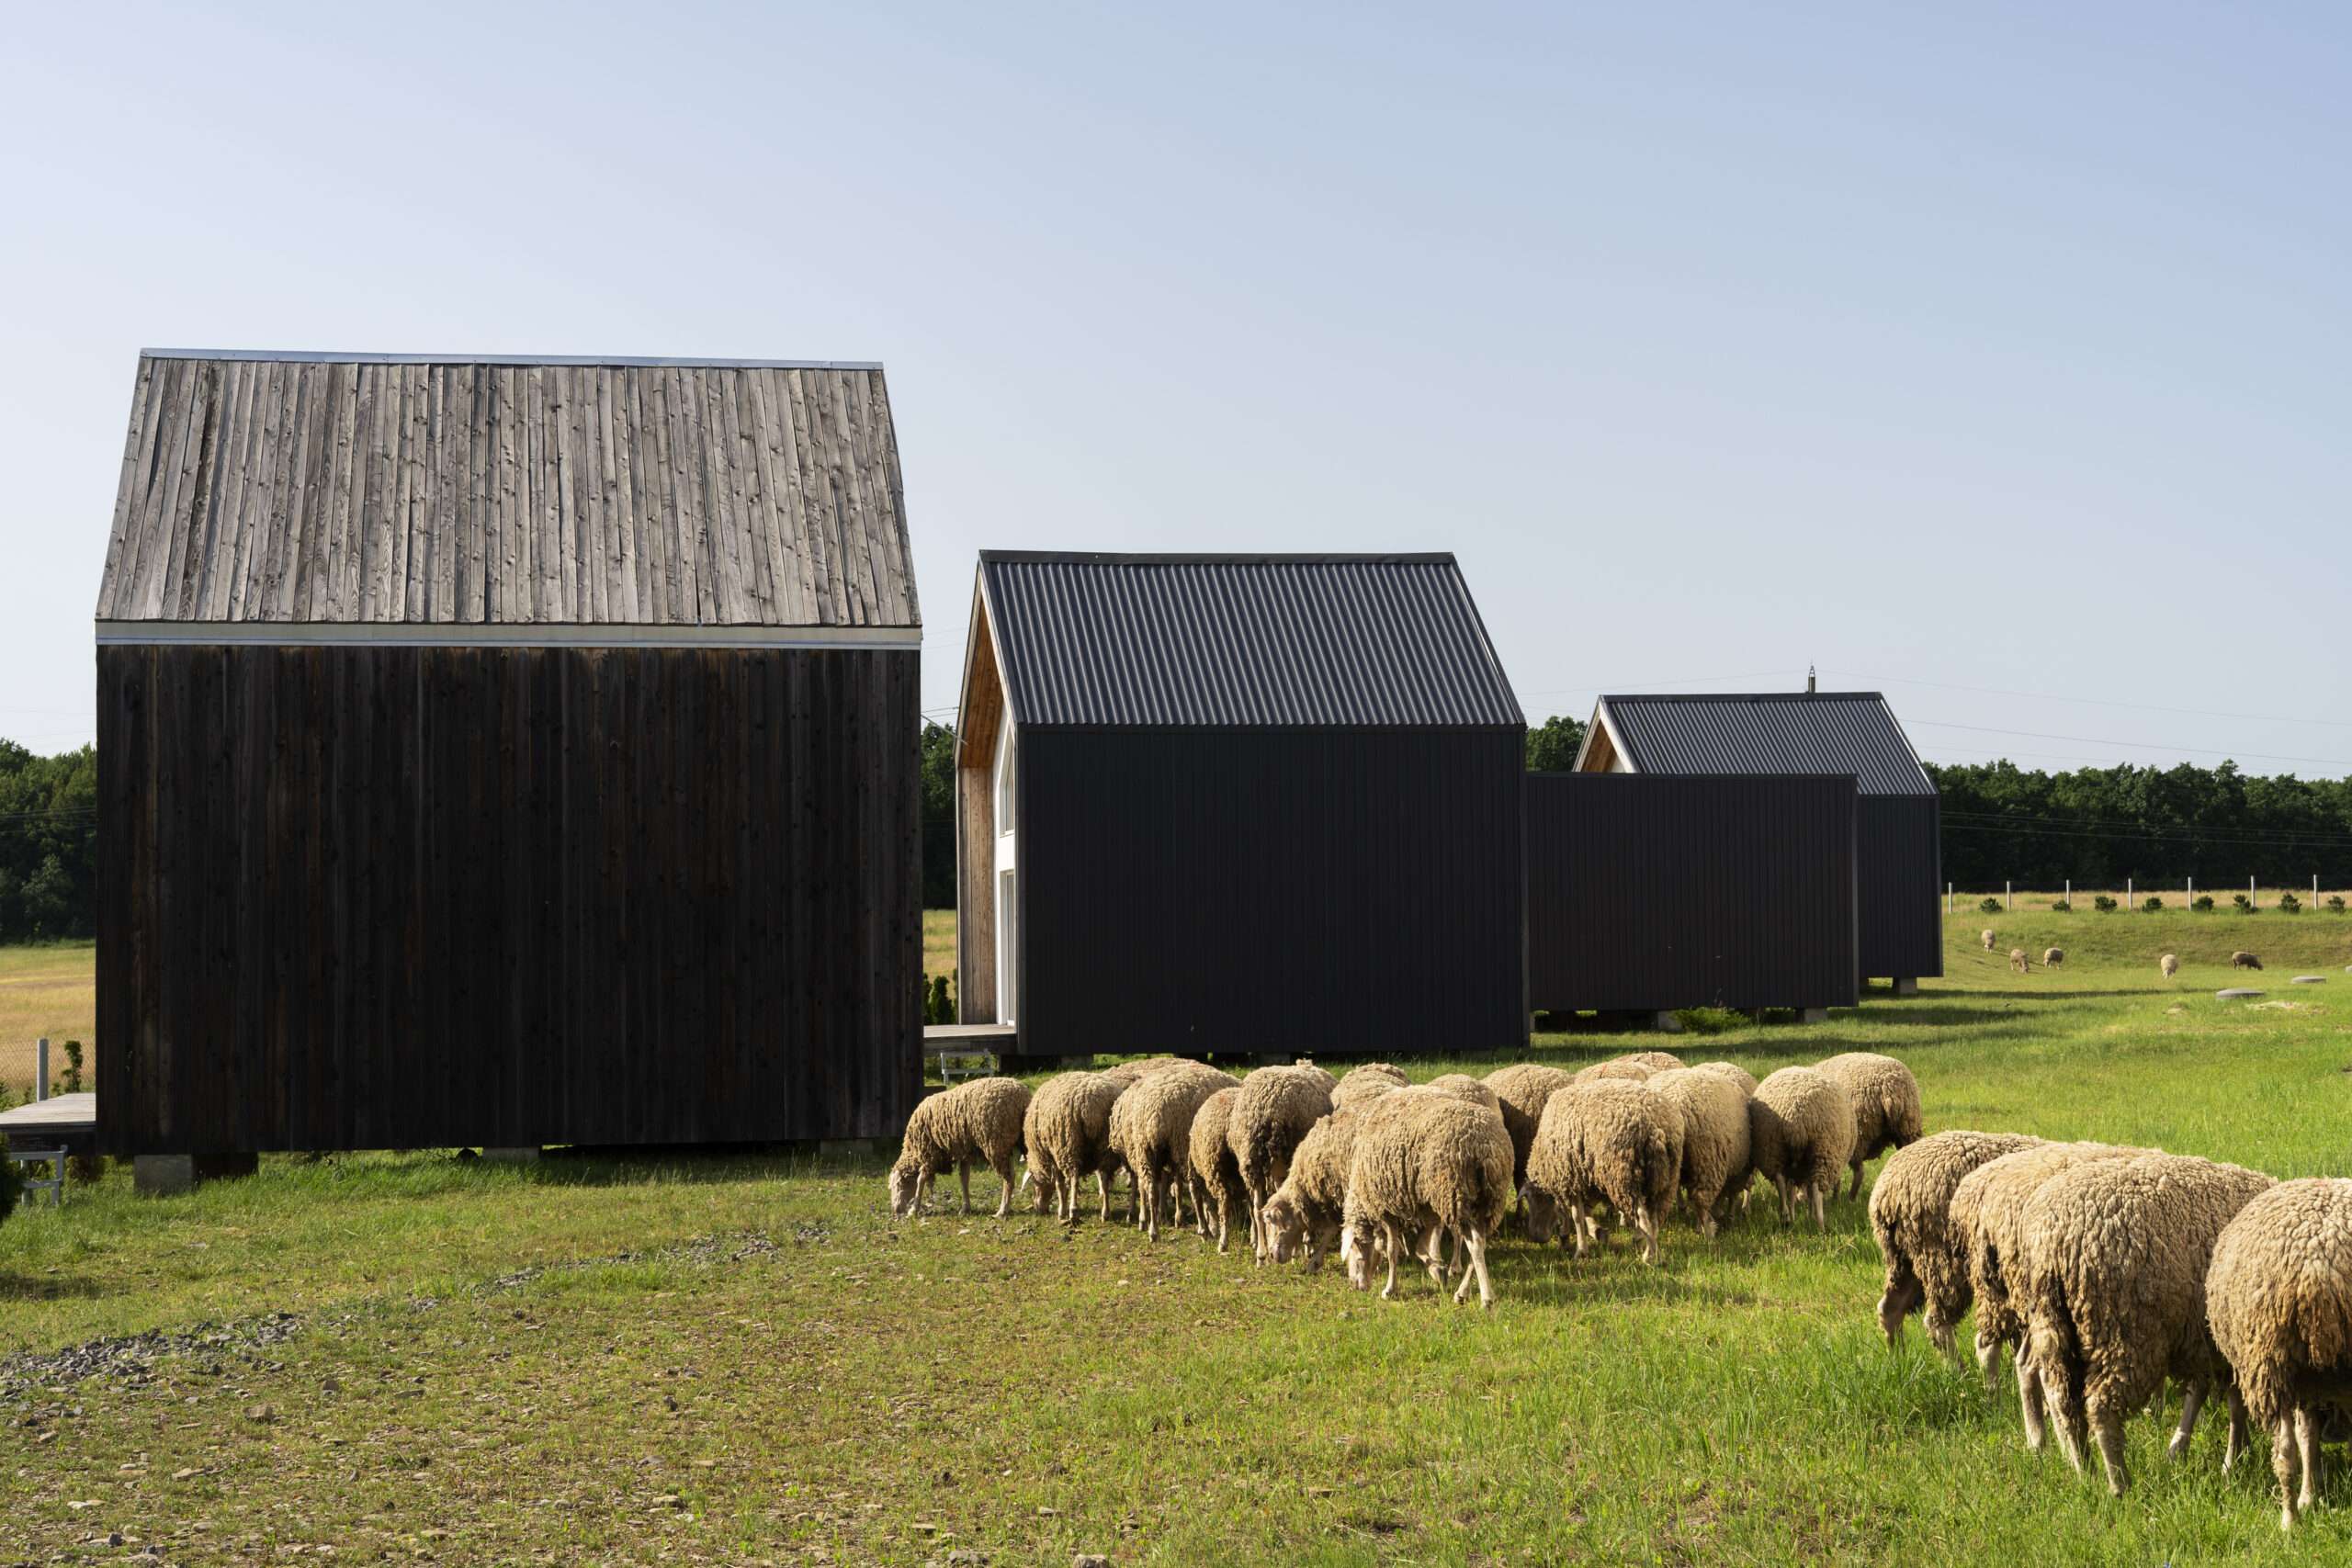 How Can You Choose The Right Size Metal Barn For Your Needs?